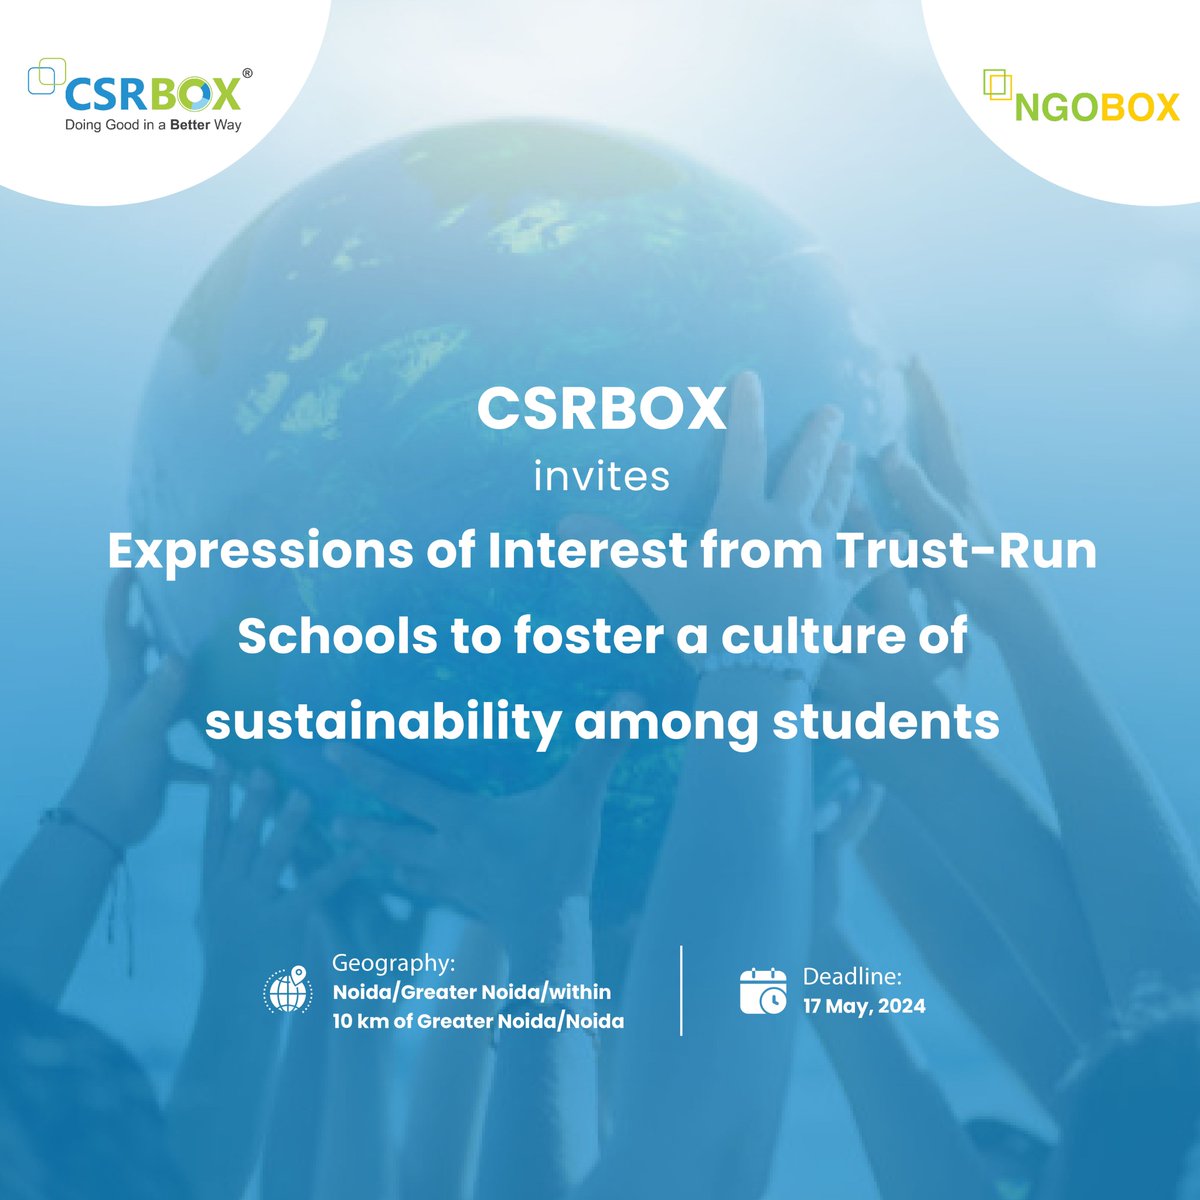 #EOI @csrboxorg invites Expressions of Interest from Trust-Run Schools to foster a culture of sustainability among students Geography: Noida/Greater Noida/within 10 km of Greater Noida/Noida Deadline: 17 May 2024 Apply: ngobox.org/full_rfp_eoi_E…